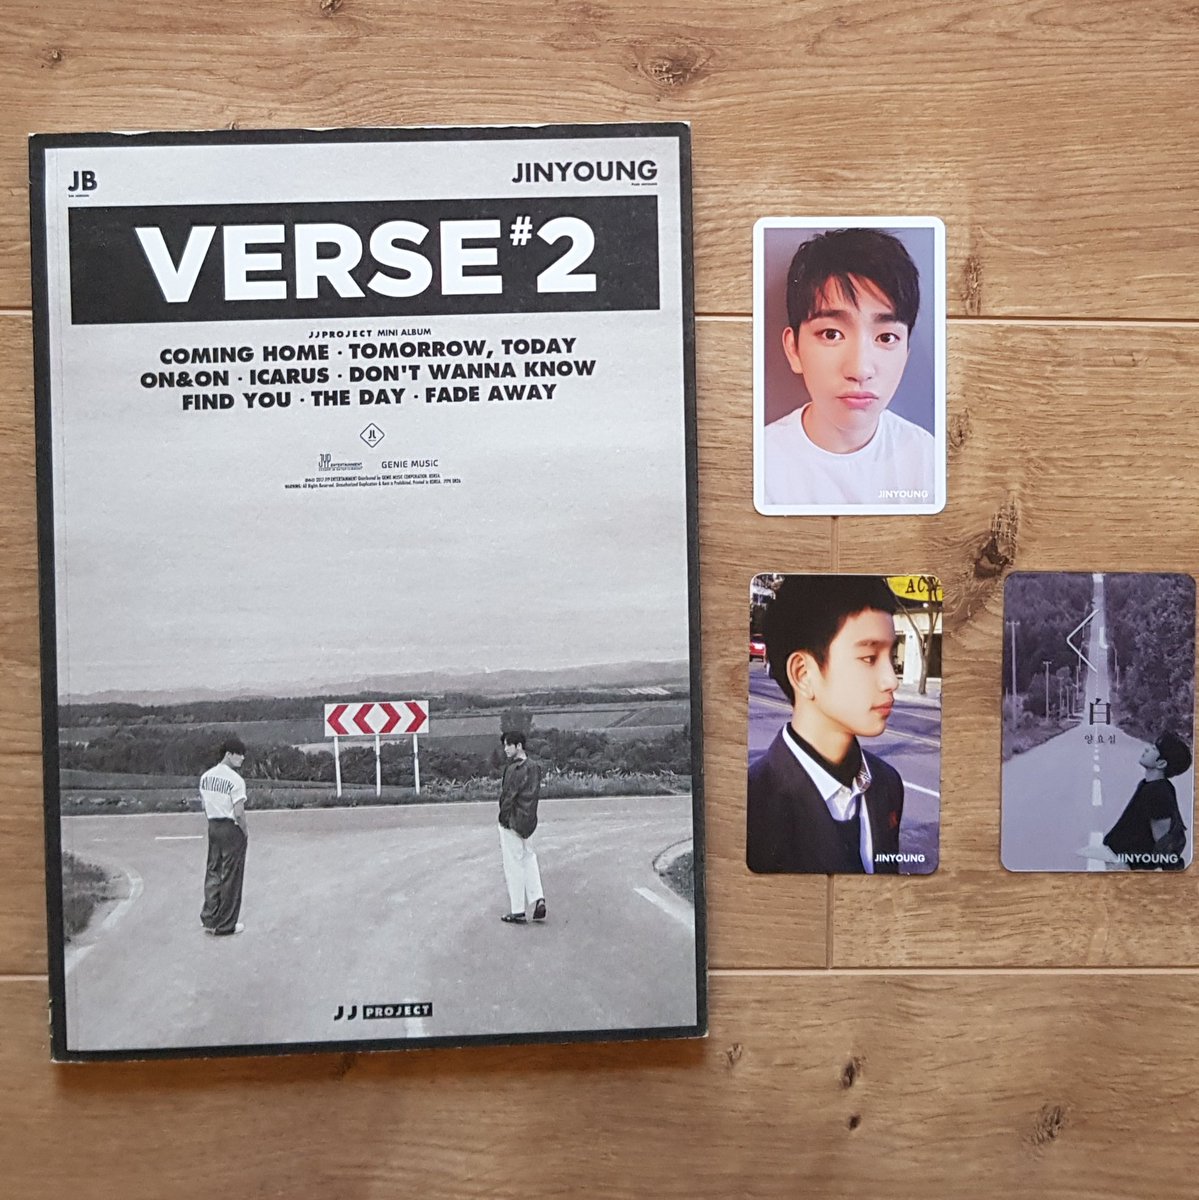 JJPROJECT - Verse #2 Photocards : JinYoung Favorite Song : On and on